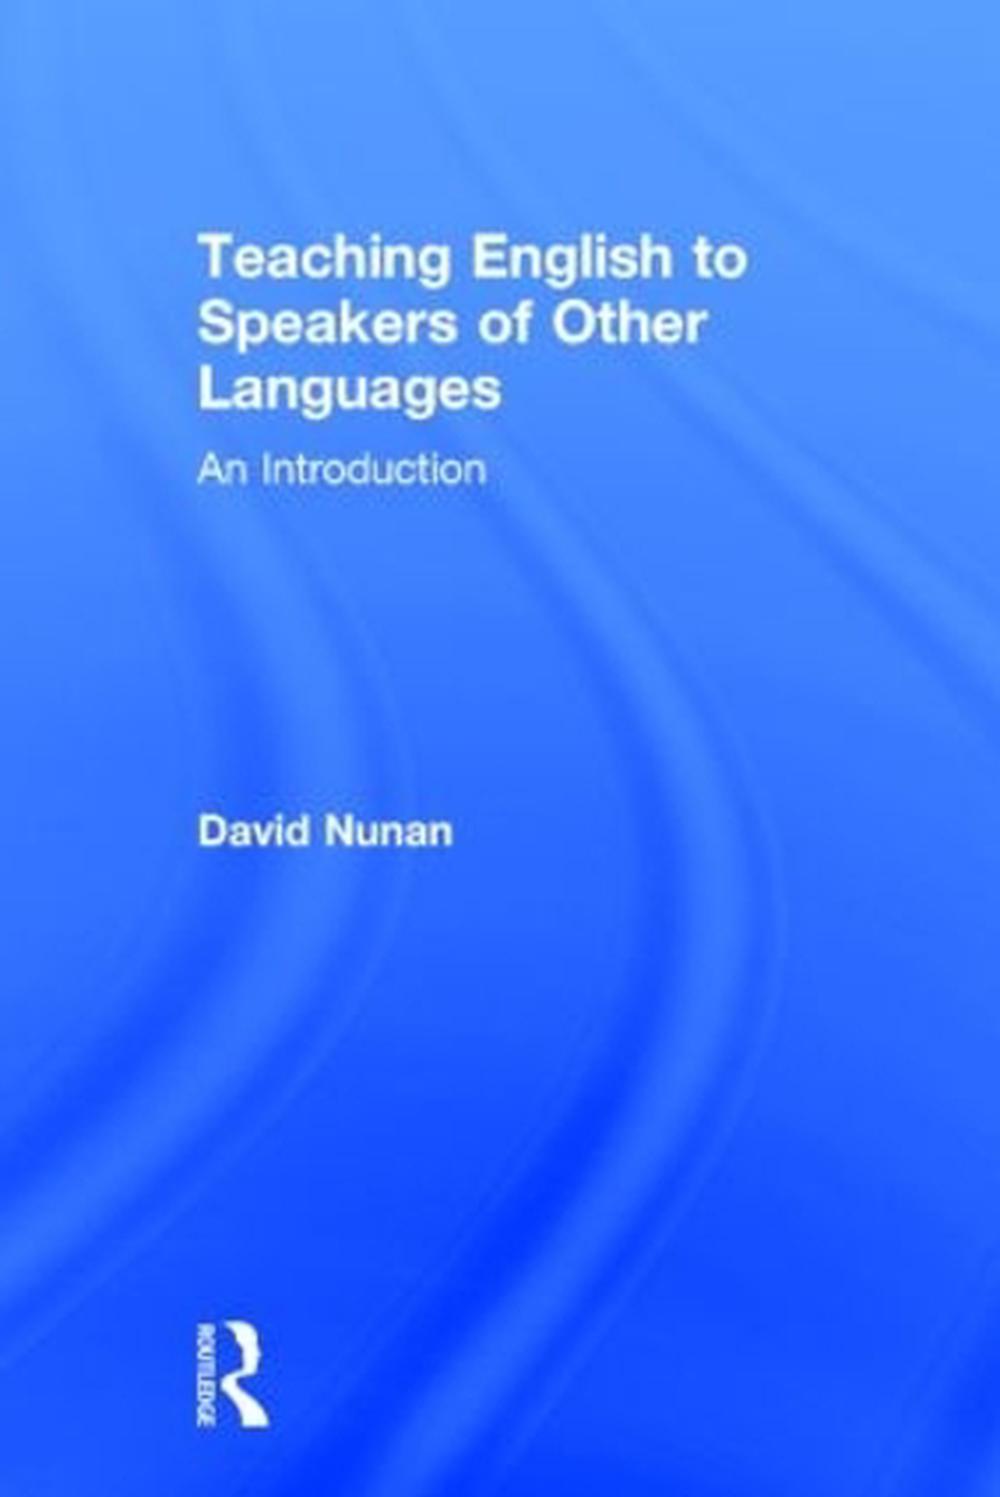 teaching-english-to-speakers-of-other-languages-an-introduction-by-david-nunan-9781138824669-ebay